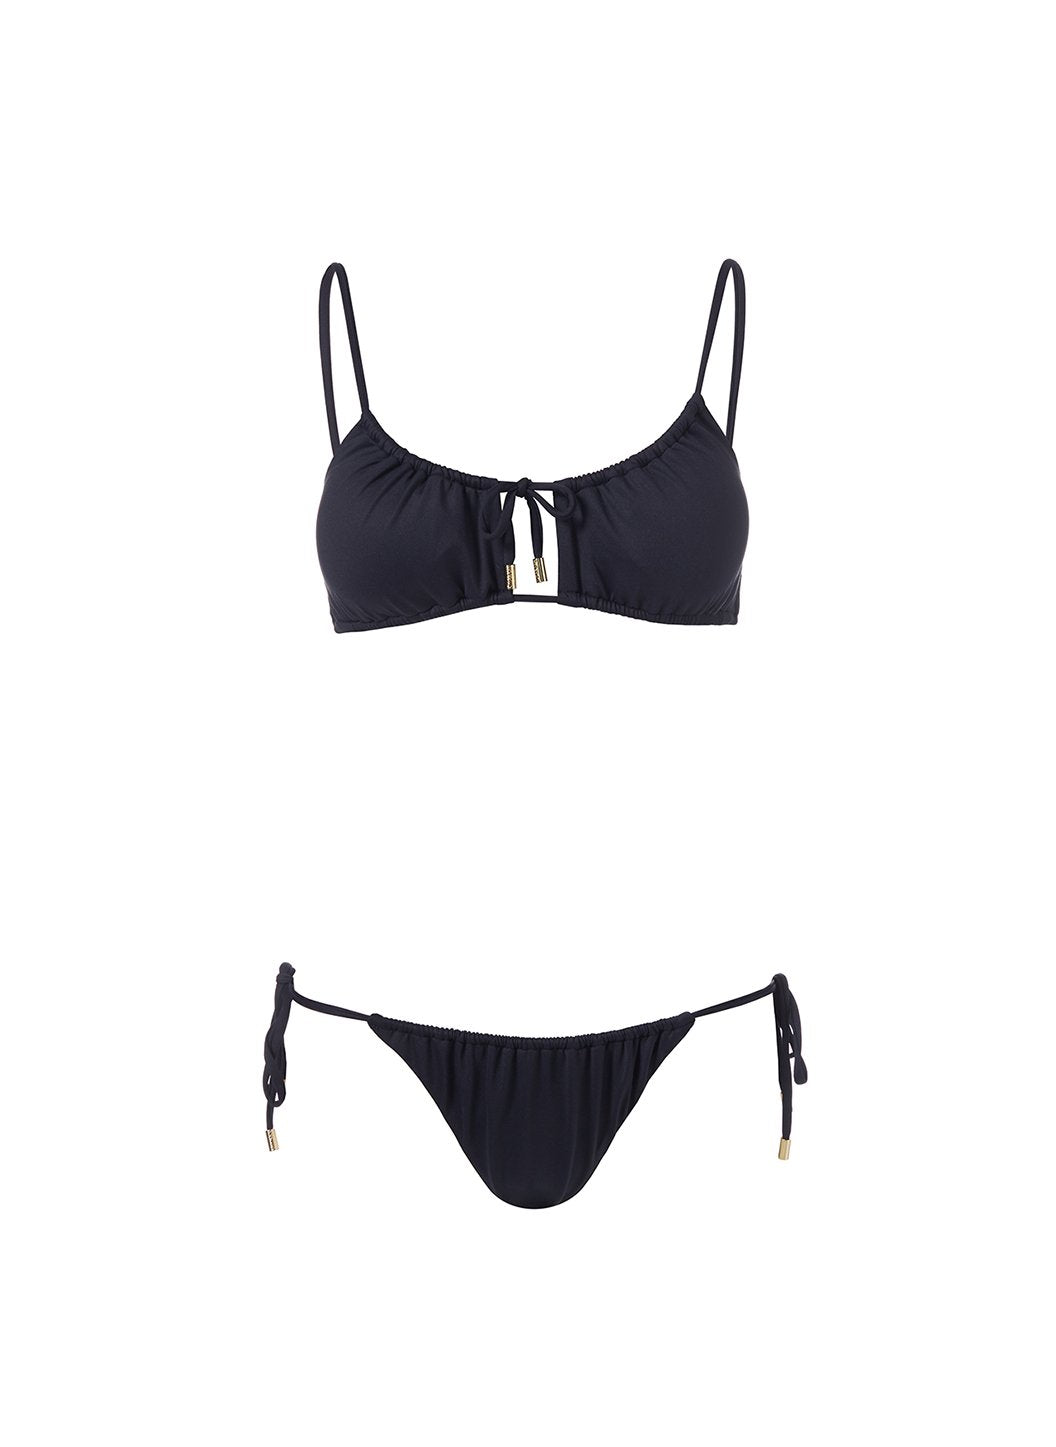 MMABIA Shapewear Swimsuits for Women Underwired Tanga Bikini Swimsuit  (Color : Black, Size : XL) : Buy Online at Best Price in KSA - Souq is now  : Fashion